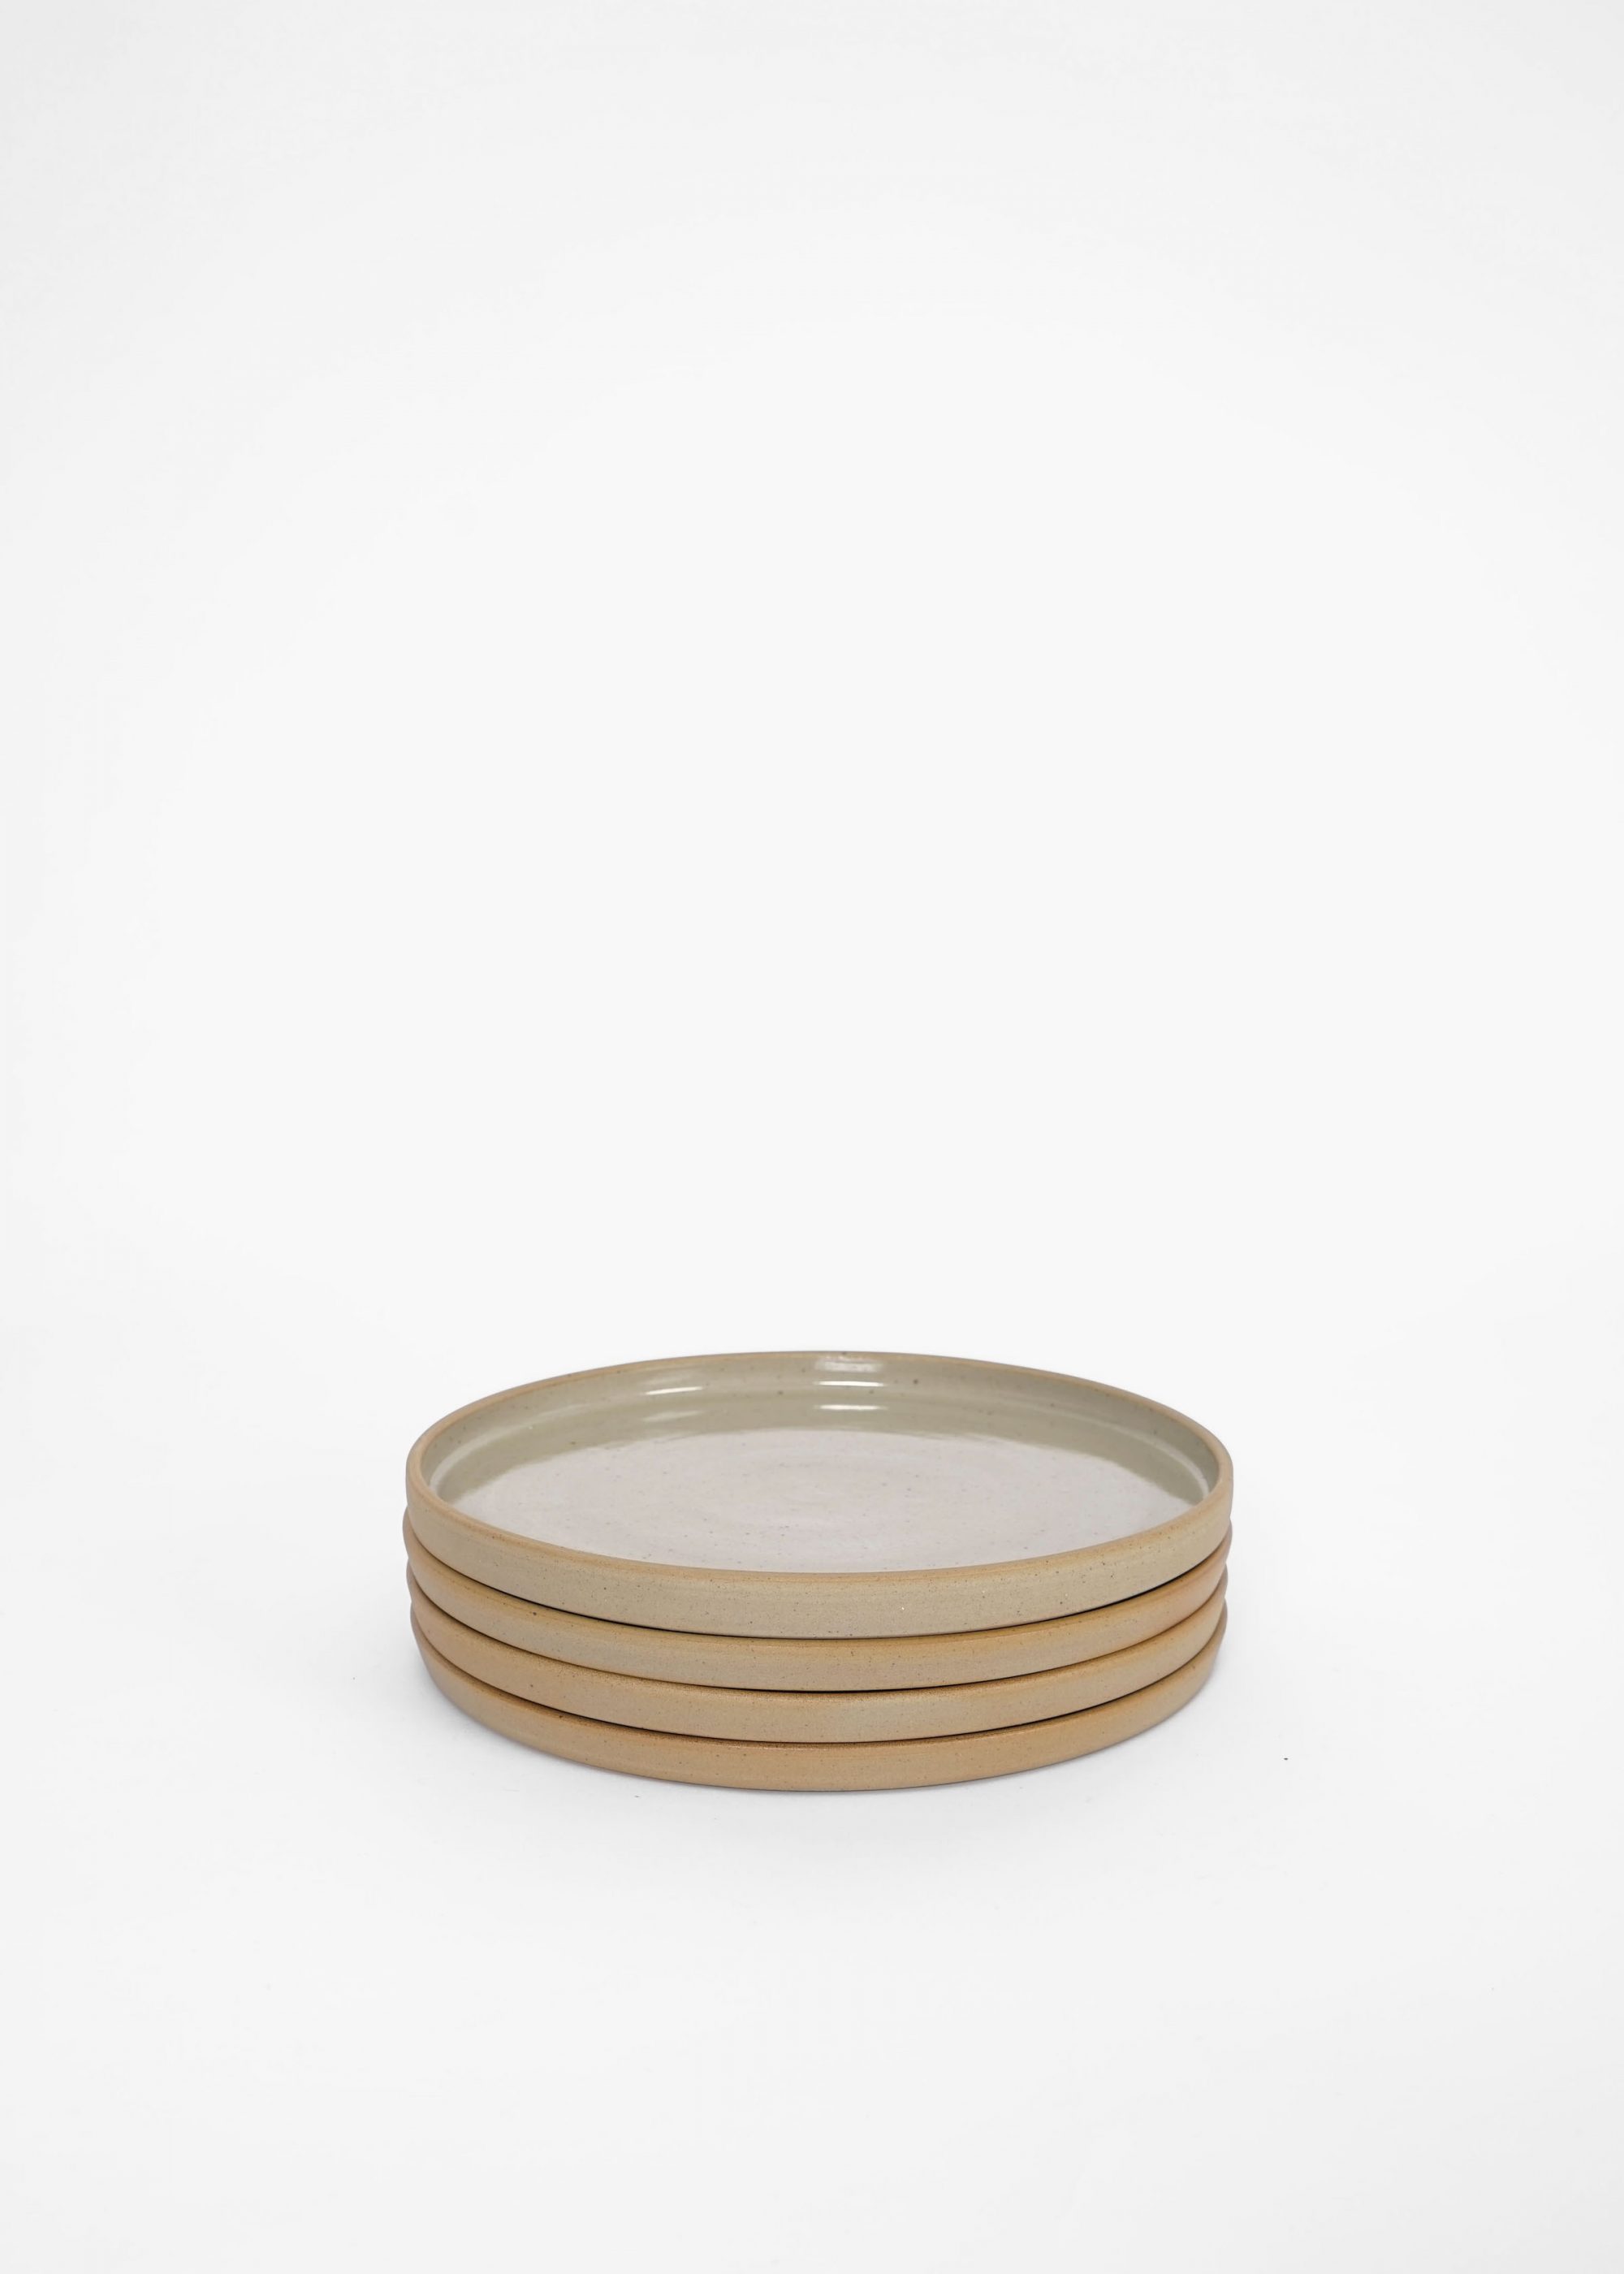 Product image for »Beuys« High-Rim Stoneware Plate 4-Set 27cm